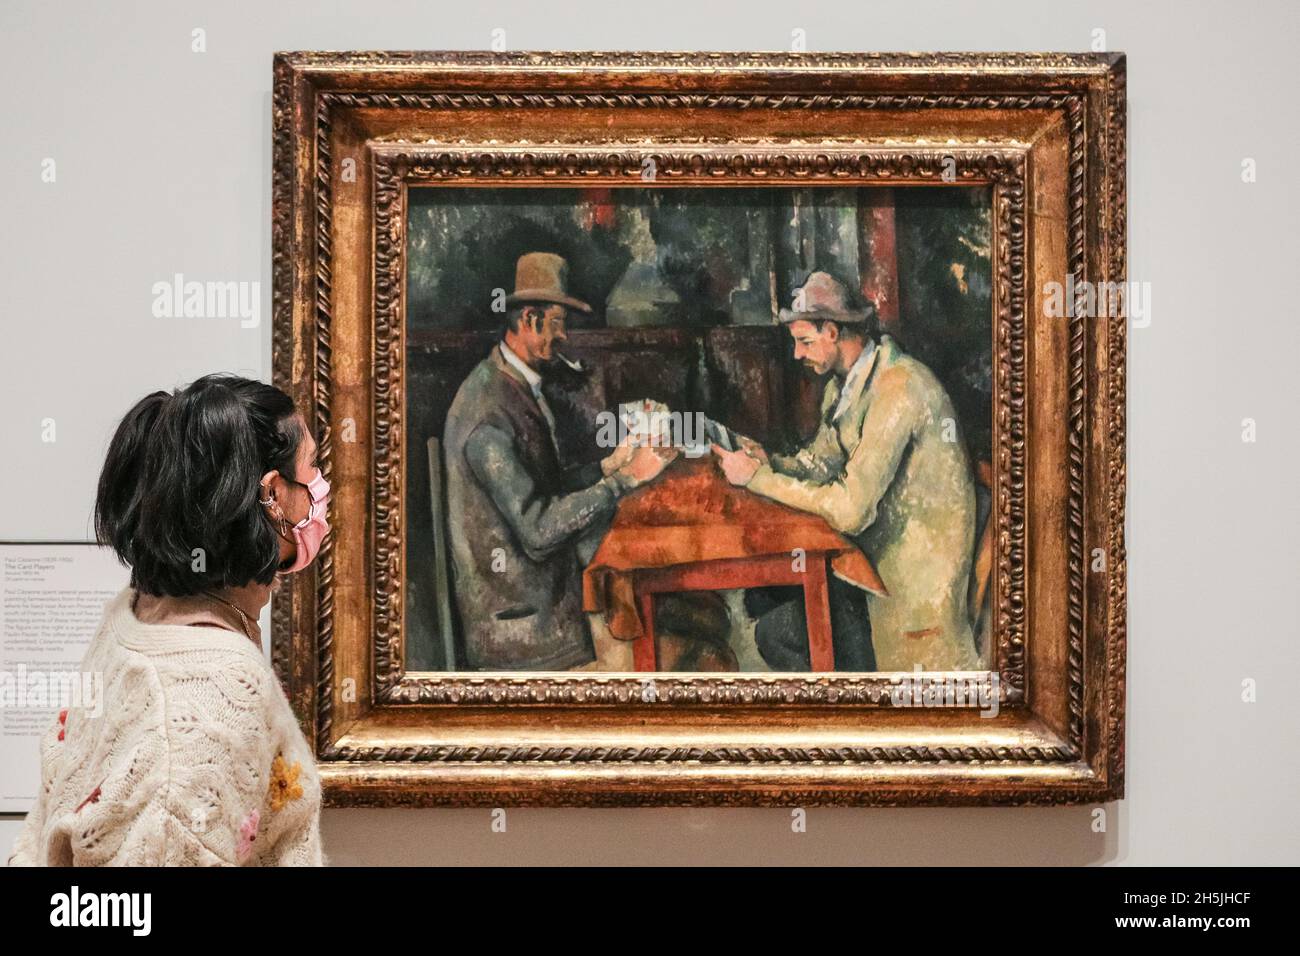 London, UK. 10th Nov, 2021. Gallery staff with Paul Cezanne, 'The Card Players' (1894-95=. The Courtauld Gallery at Somerset House in London will re-open to the public on Friday 19 November following the most significant modernisation project in its history, providing a transformed home for one of the UK's greatest art collections. Credit: Imageplotter/Alamy Live News Stock Photo